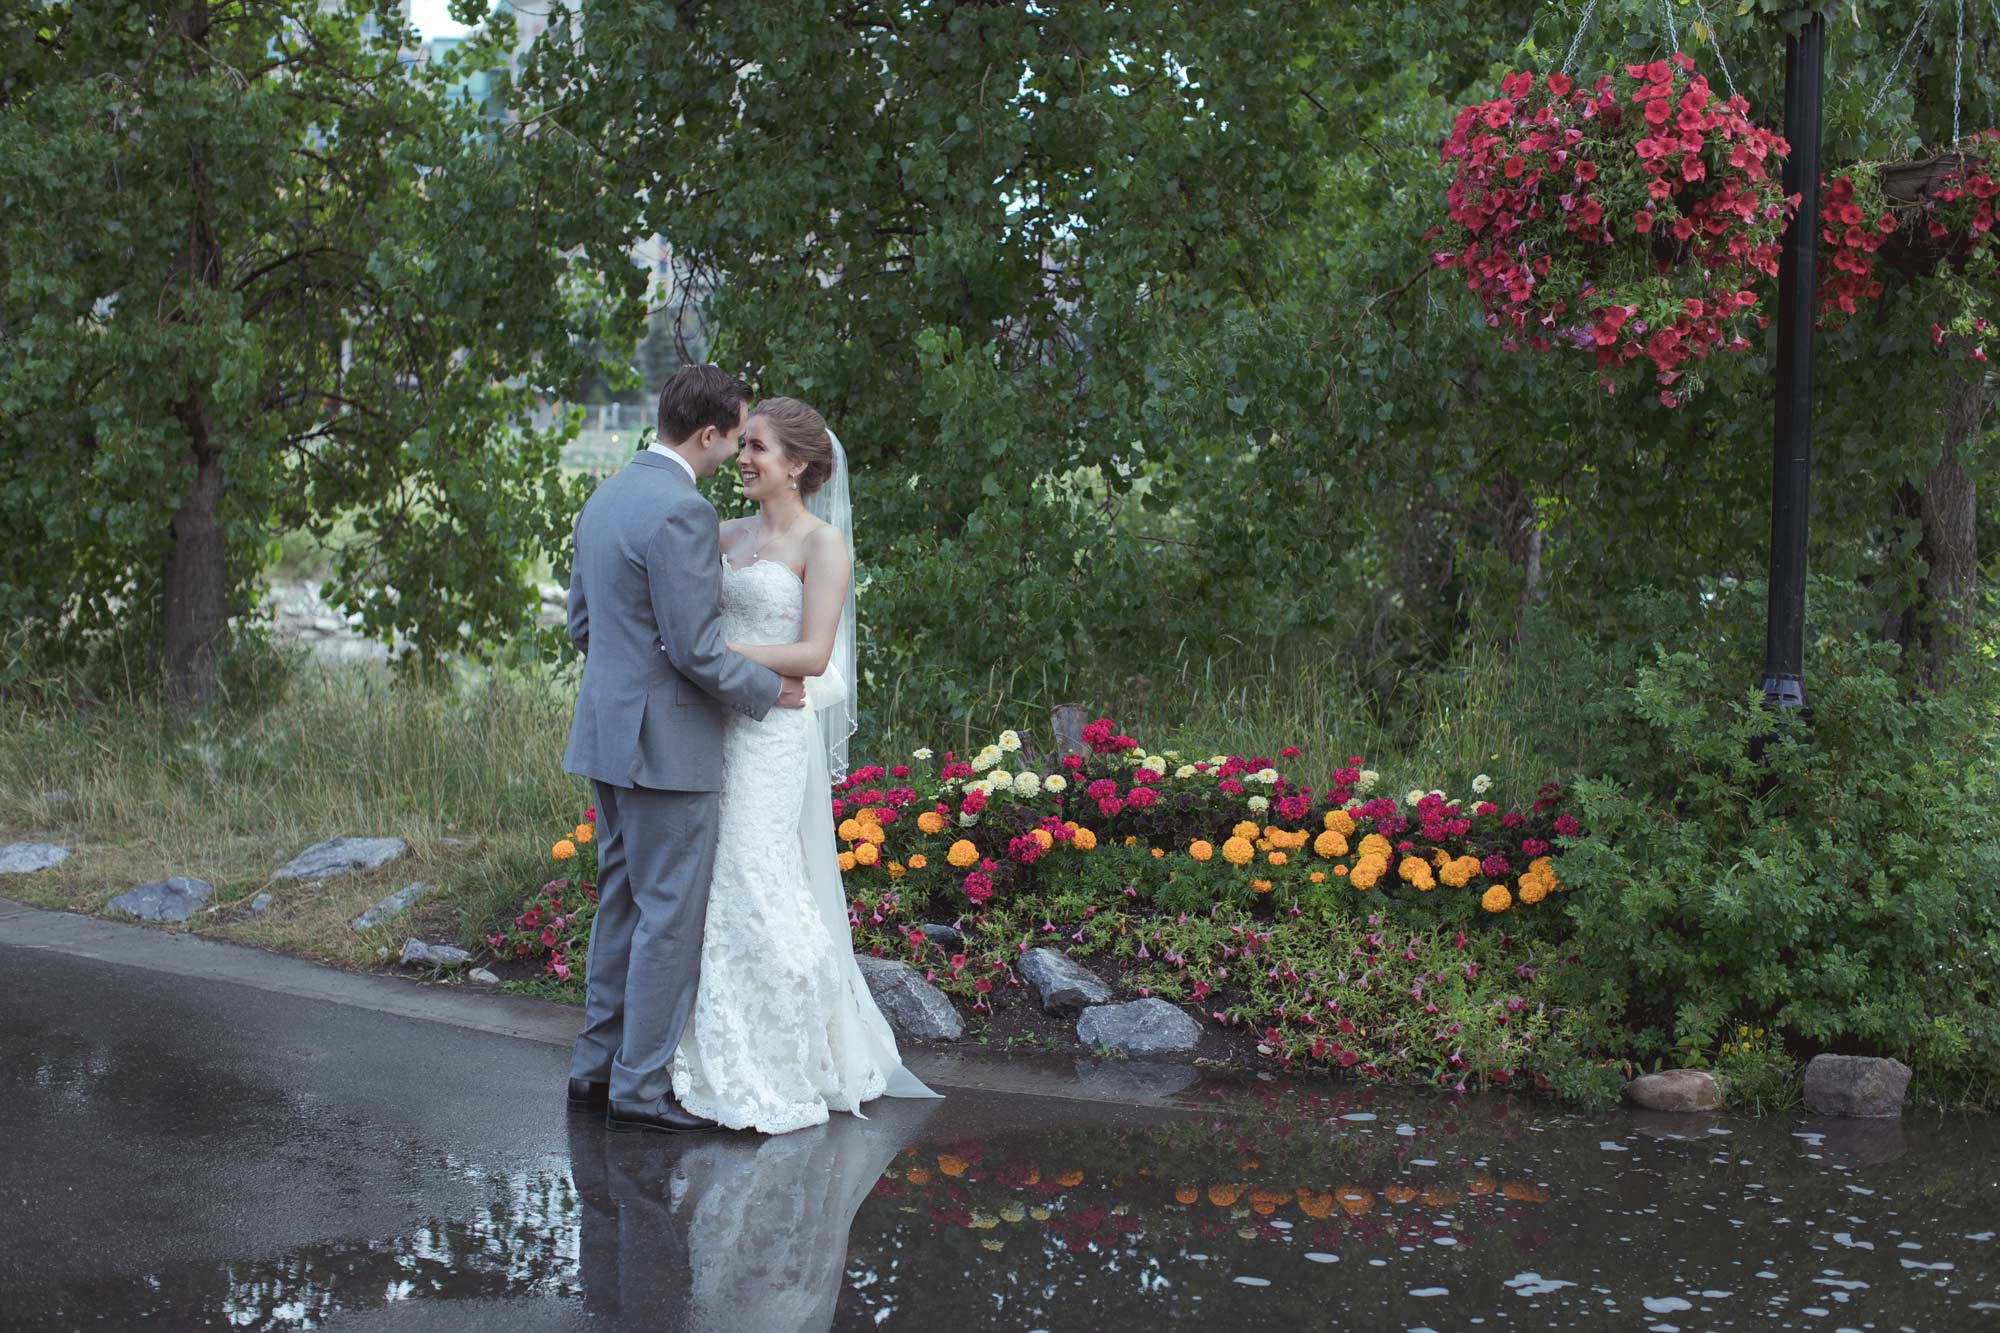 PRINCE’S ISLAND PARK ROMANTIC WEDDING IN CALGARY, Calgary wedding photographer, Calgary Bride, Wedding Ideas, Romantic Wedding, River Cafe Wedding, Claudia T Photography